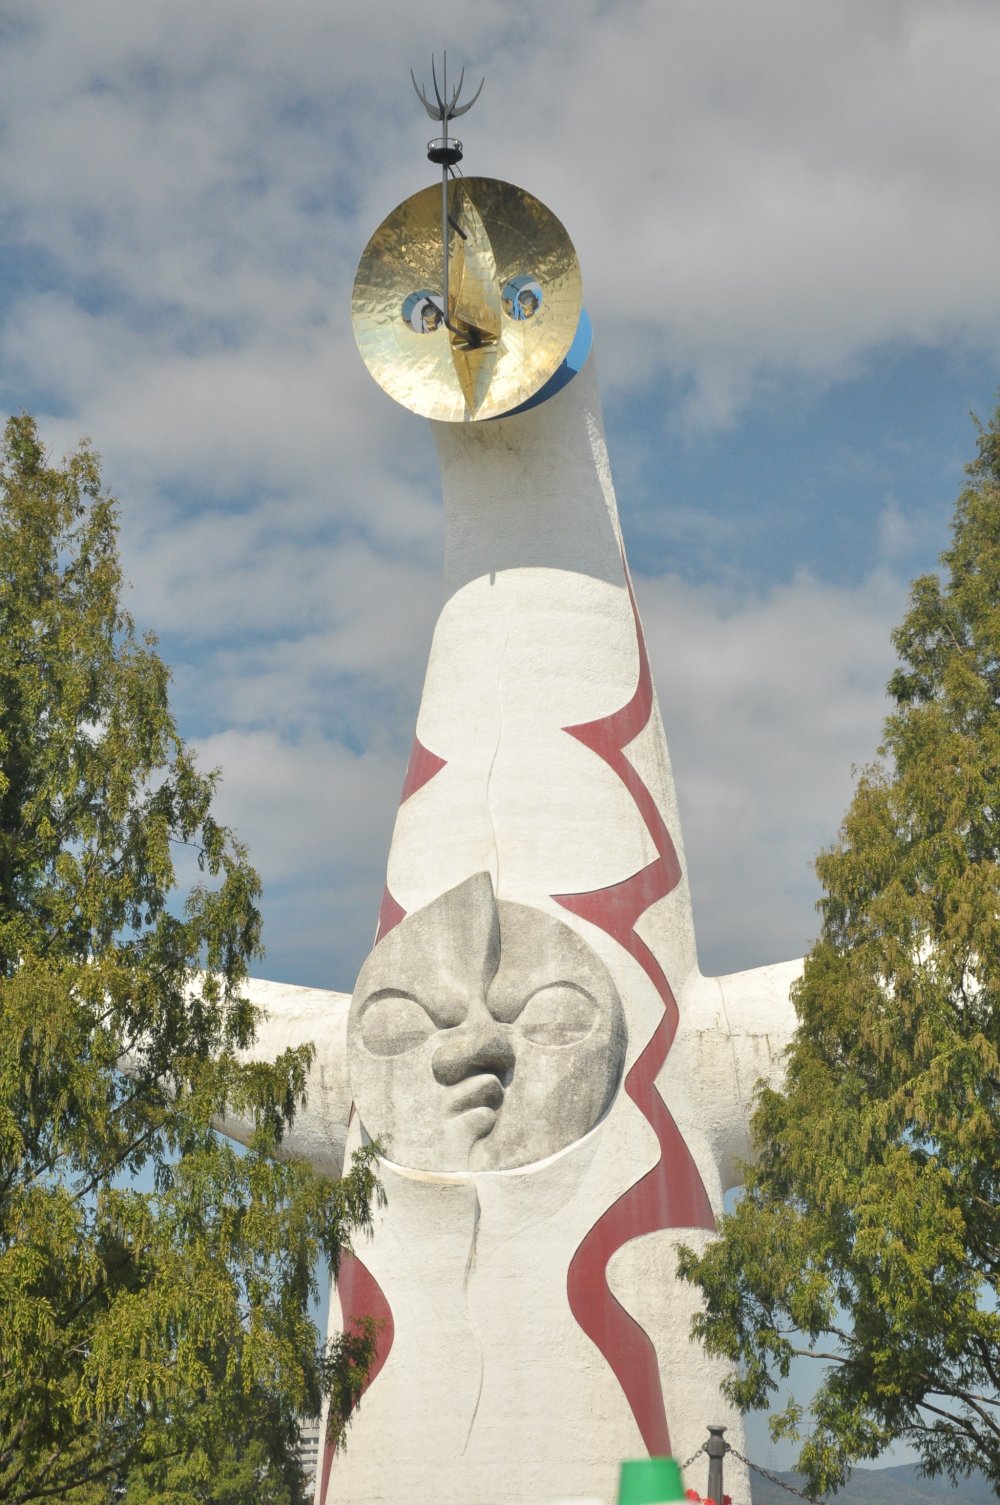 The sun tower as the ultimate symbol of the event in 1970